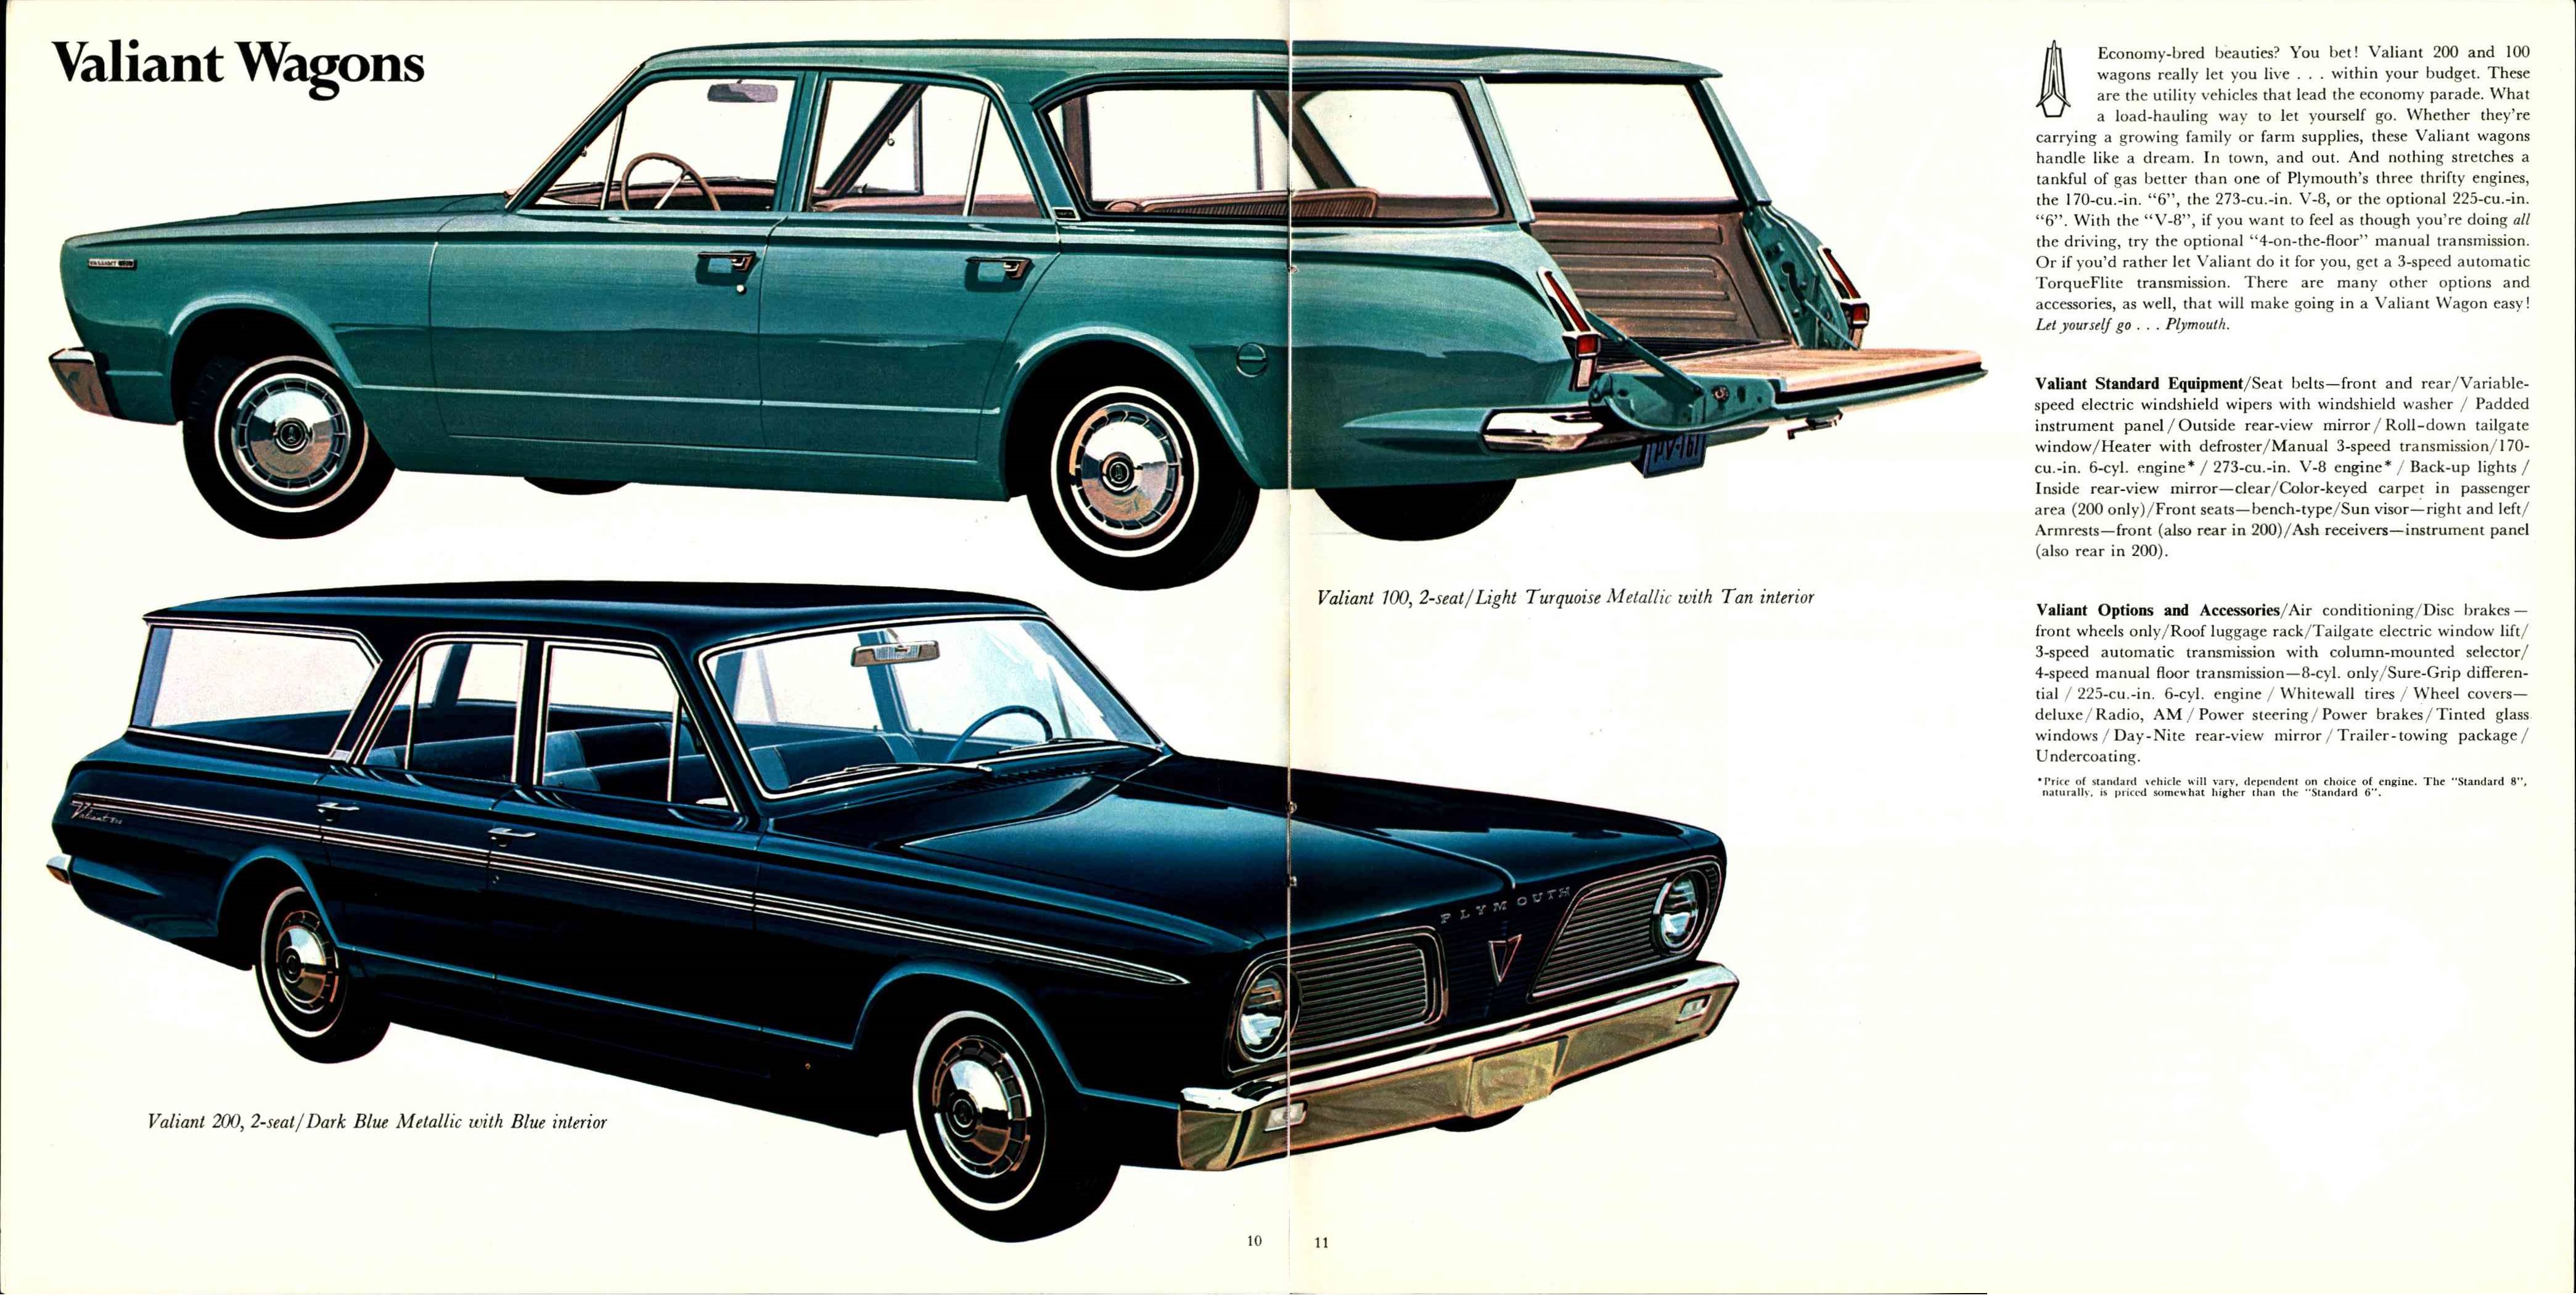 1966 Plymouth Wagons 10-11